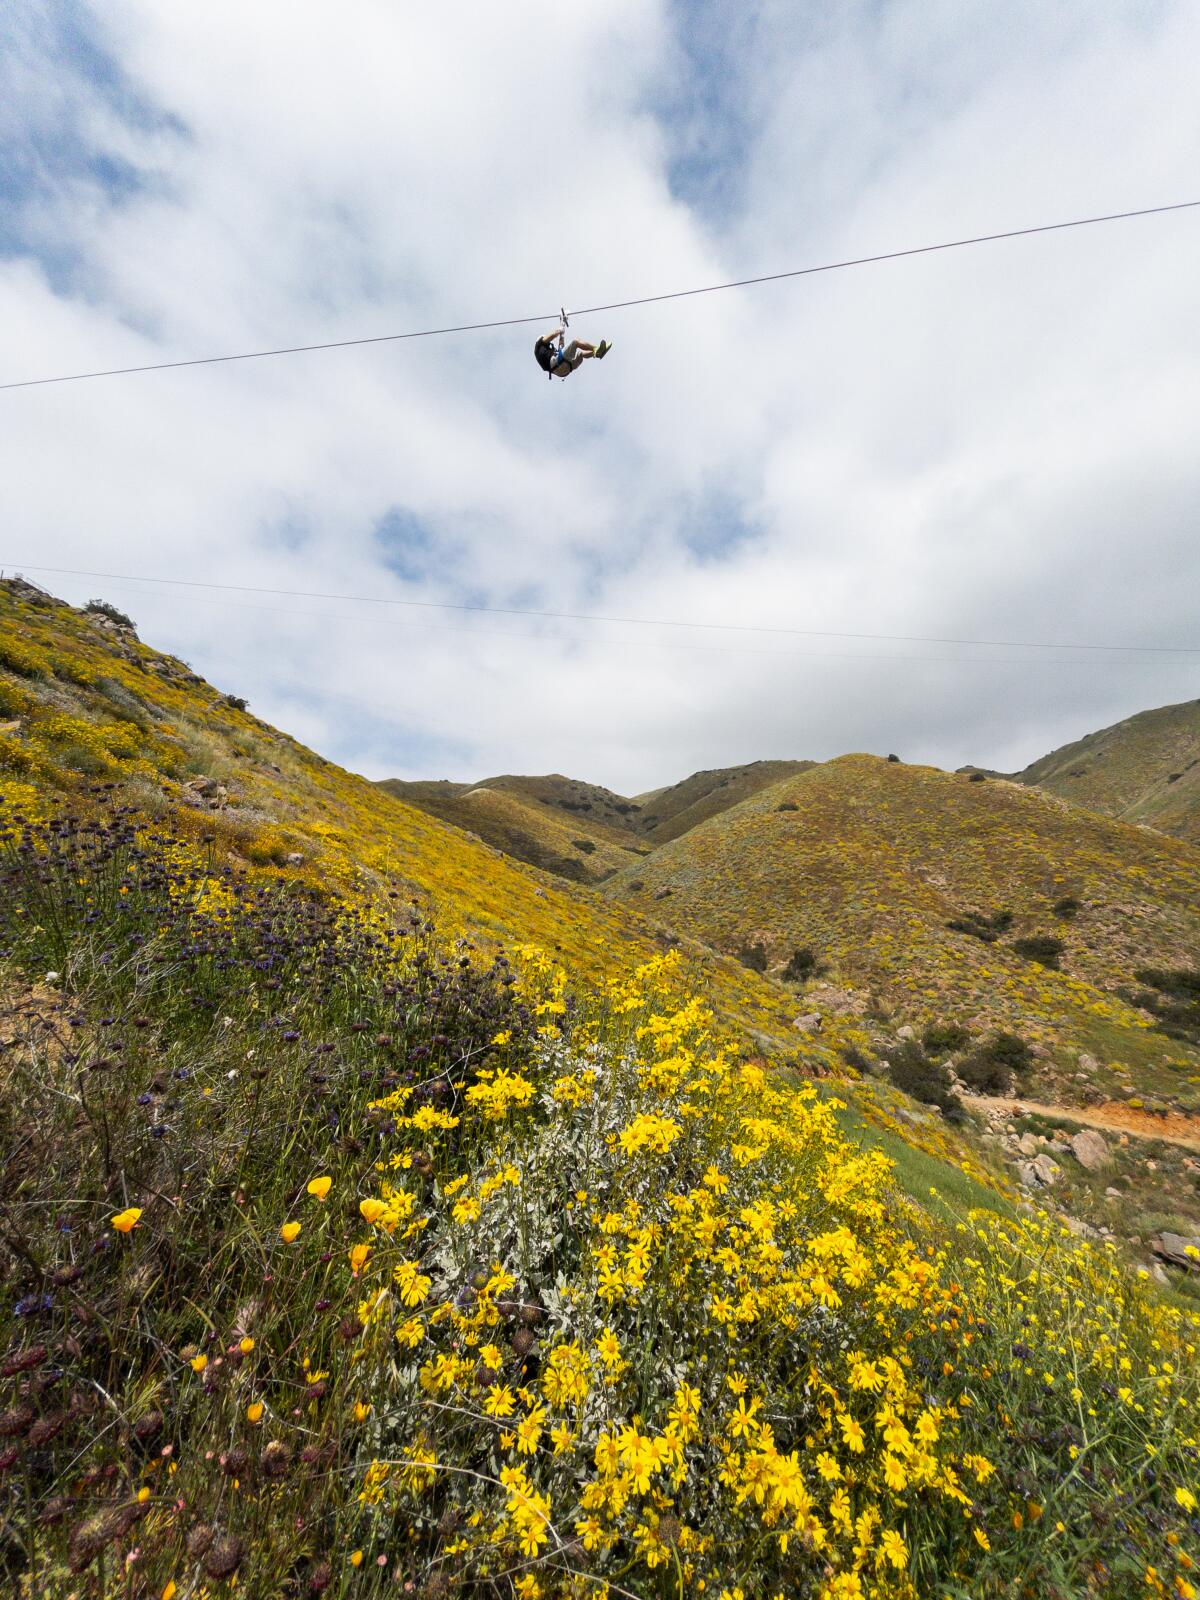 A zip-liner sails above wildflowers